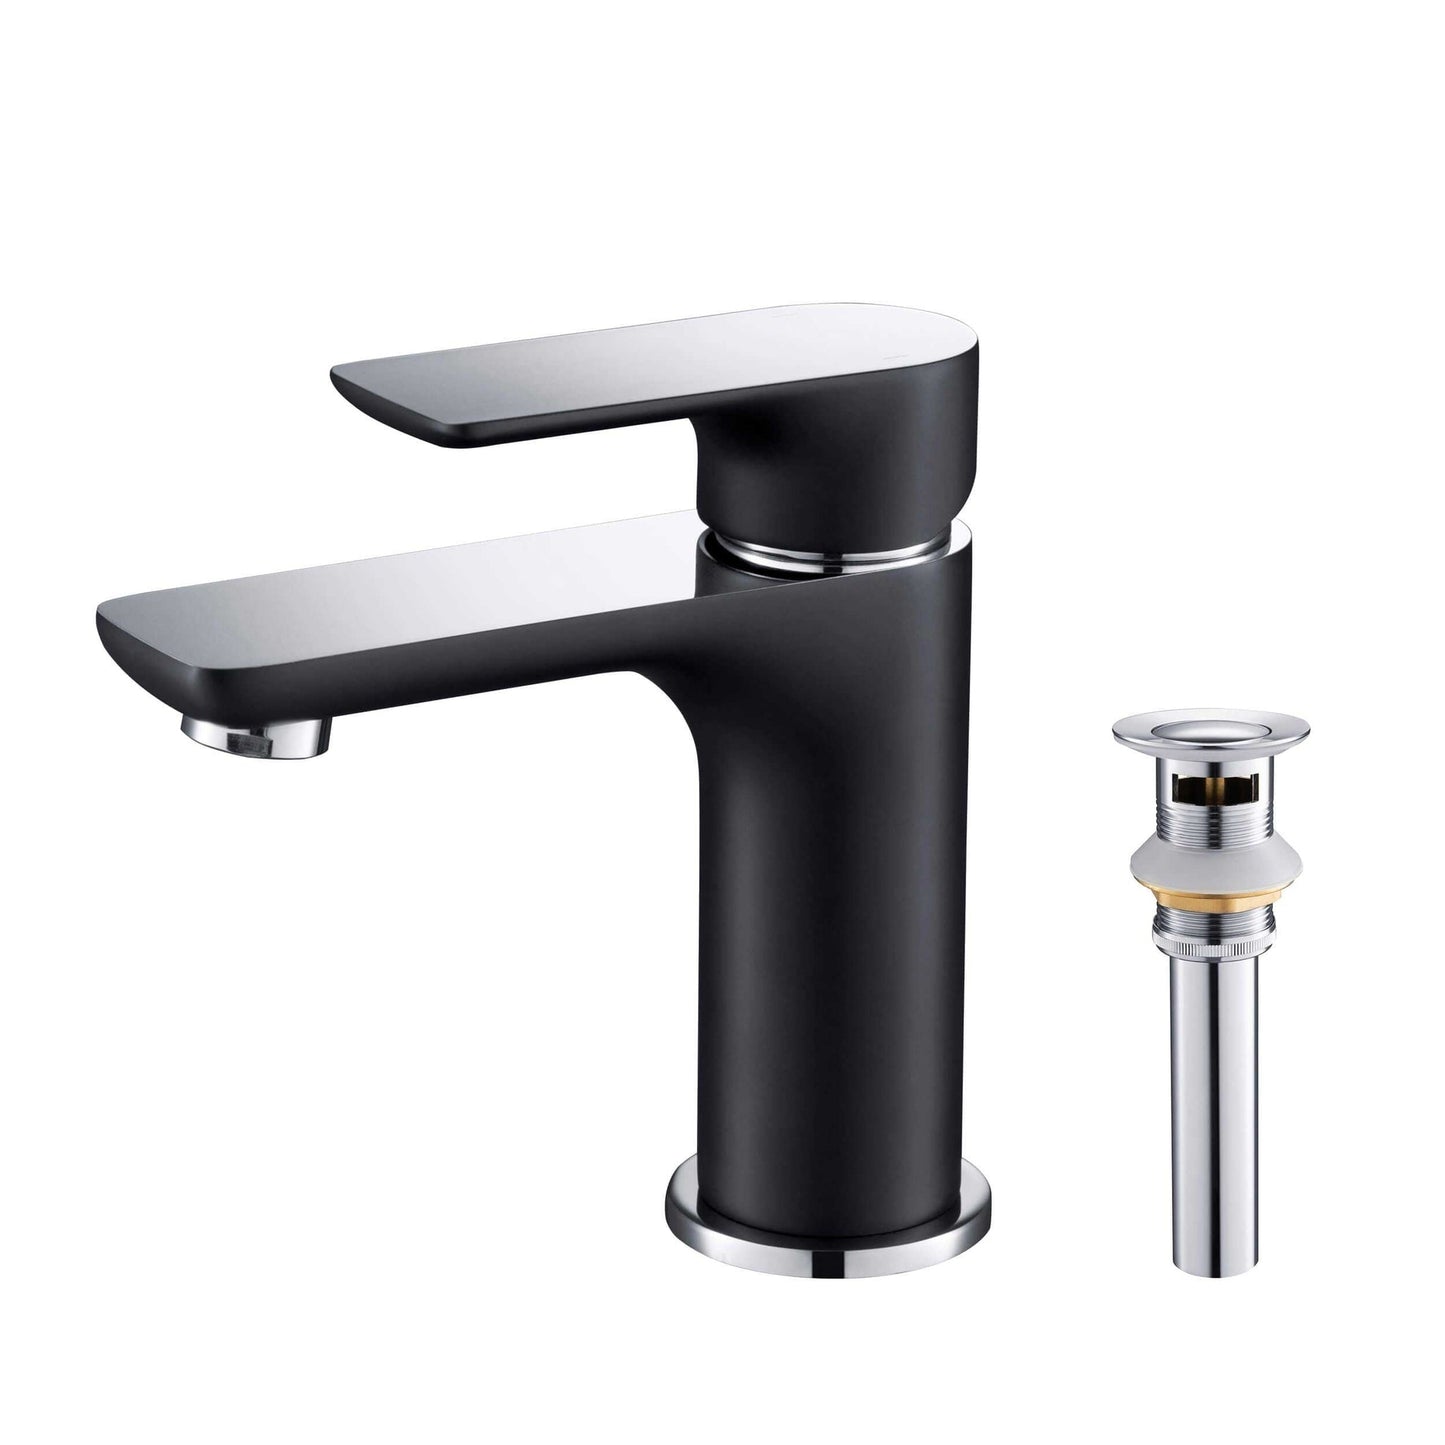 KIBI Tender Single Handle Black Solid Brass Bathroom Sink Faucet With Chrome Pop-Up Drain Stopper Small Cover With Overflow